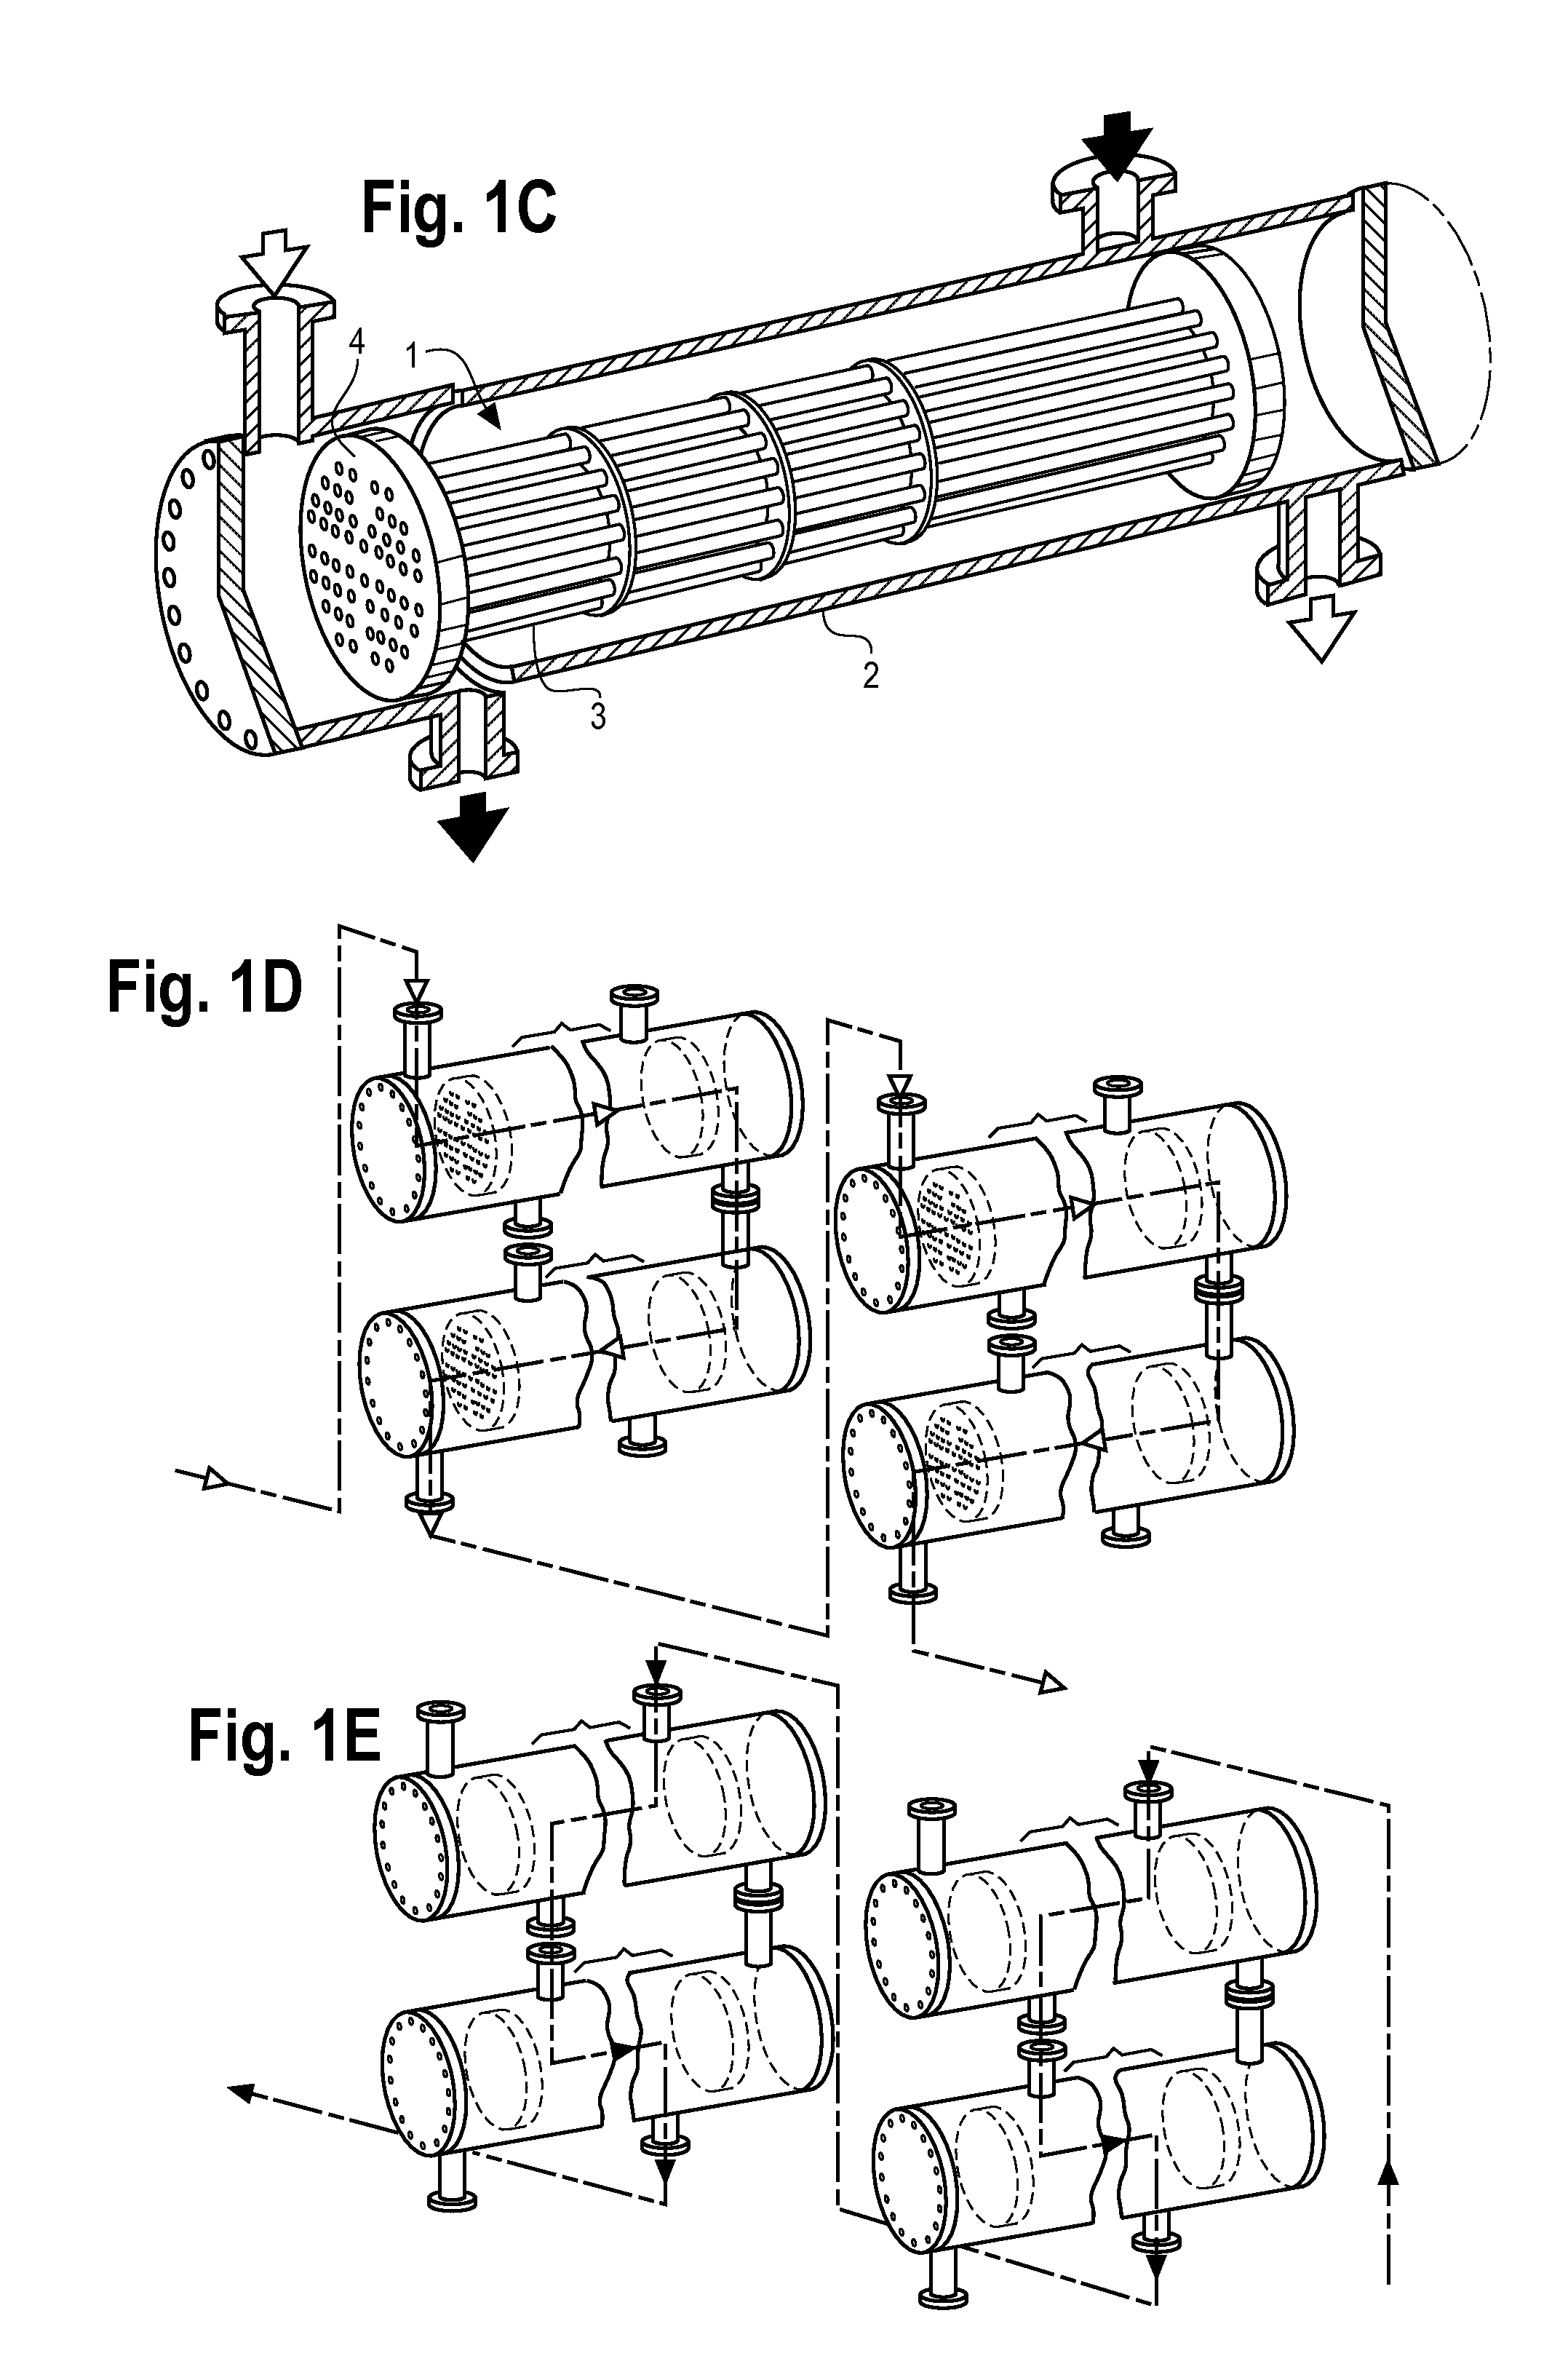 Method and system for the in-situ removal of carbonaceous deposits from heat exchanger tube bundles